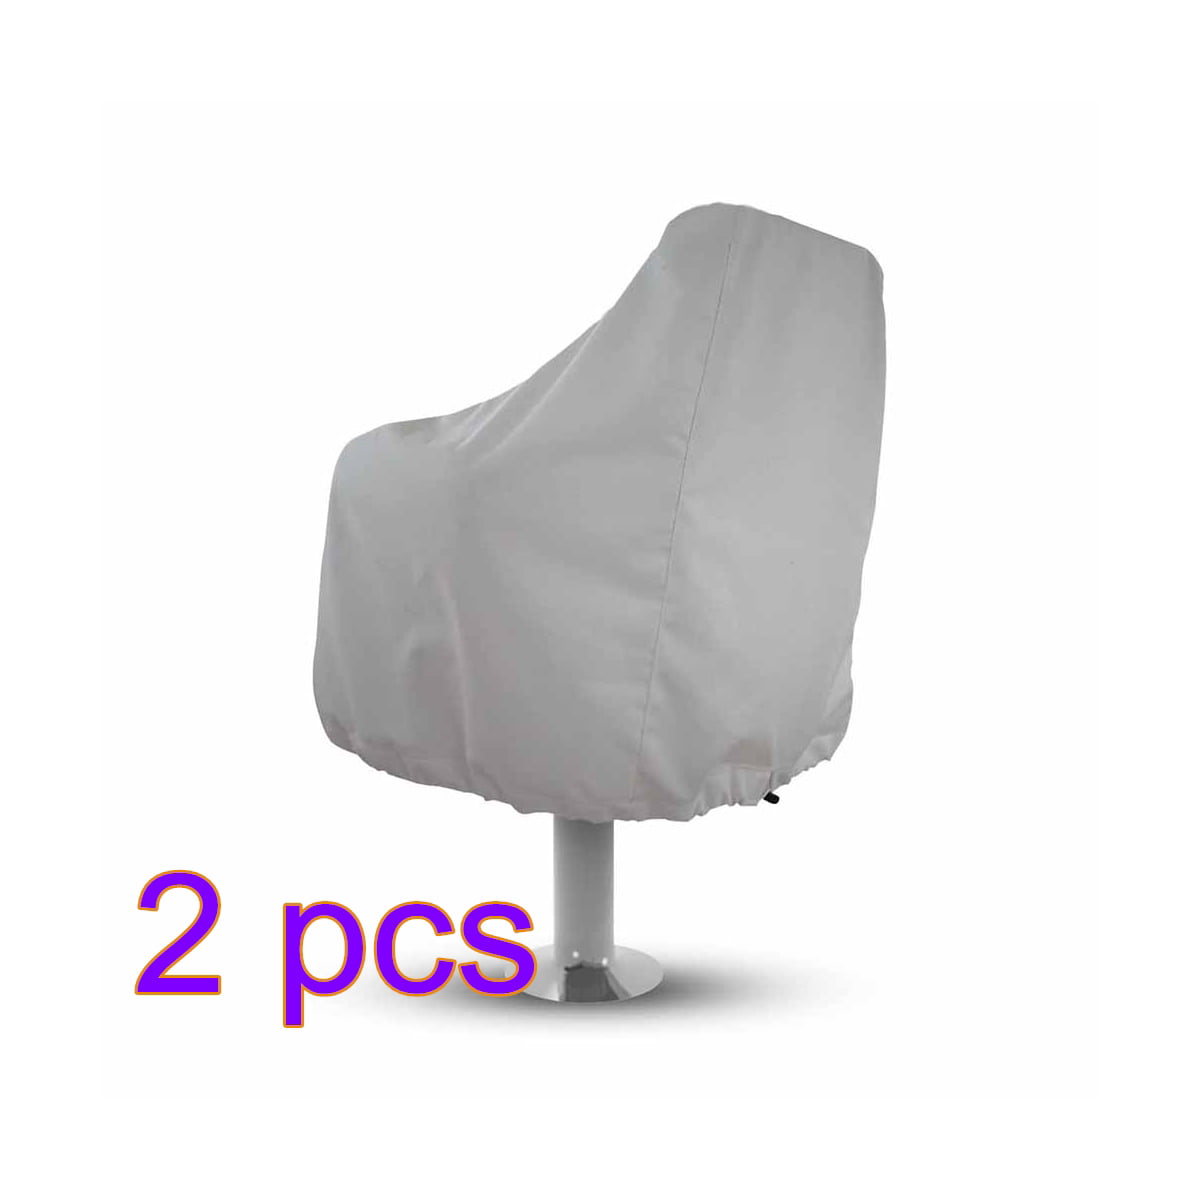 Boat Chair Protective Cover Boat Captain's Chair Cover for Outdoor Blingbin Waterproof Boat Seat Cover 